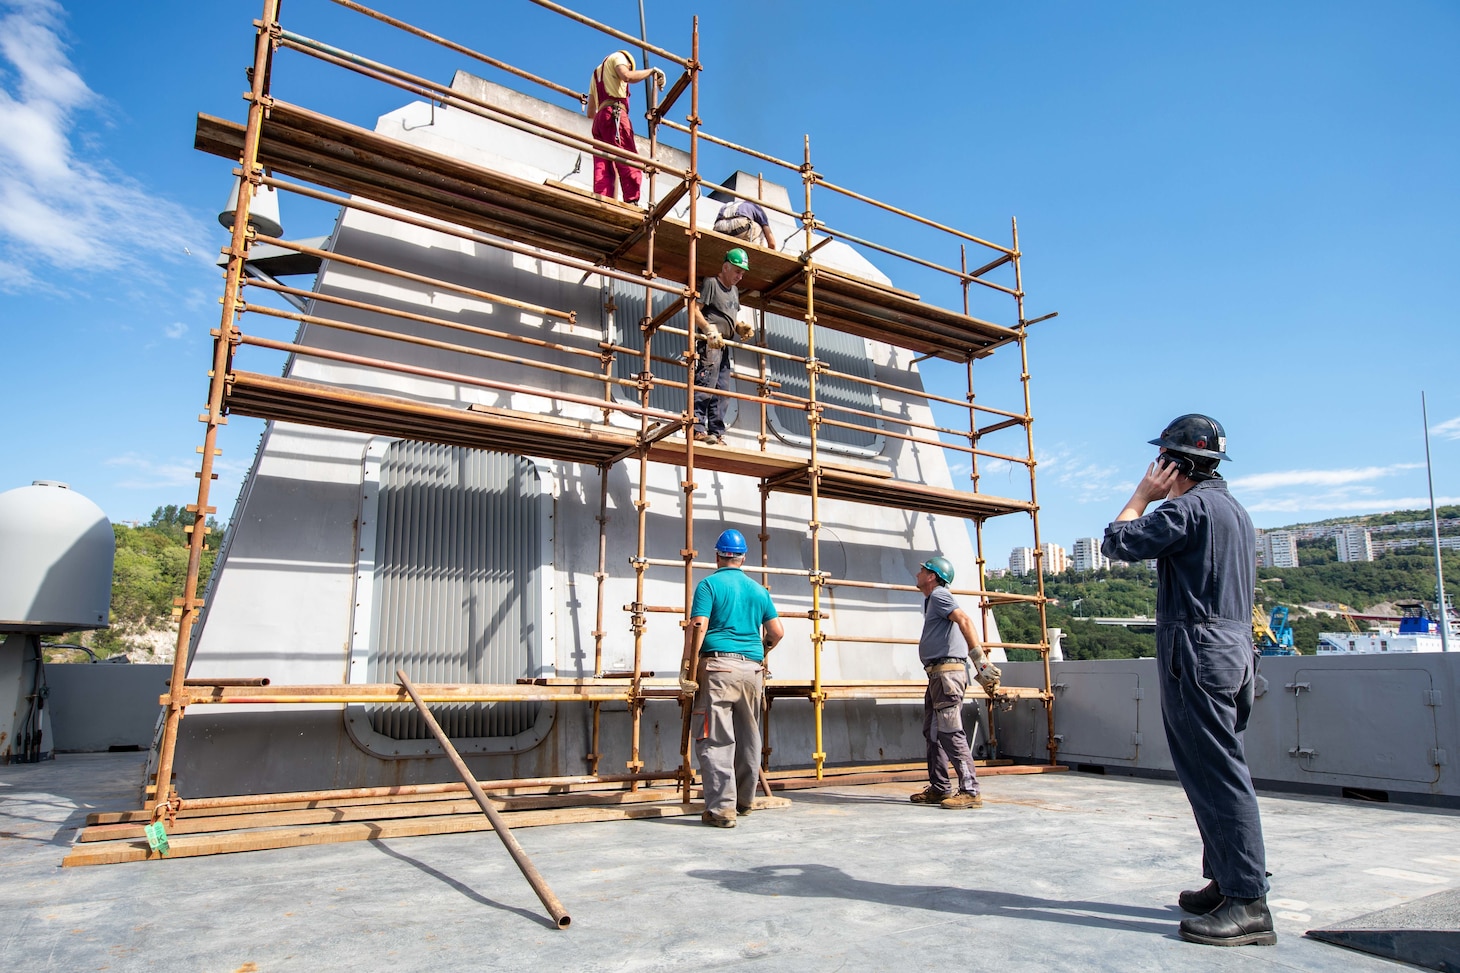 Electronics Technician 3rd Class Alex Lare, right, from King George, Virginia, assigned to the San Antonio-class amphibious transport dock ship USS Arlington (LPD 24), supervises contractors during preservation work for mid-deployment voyage repairs in Rijeka, Croatia, July 6, 2022.